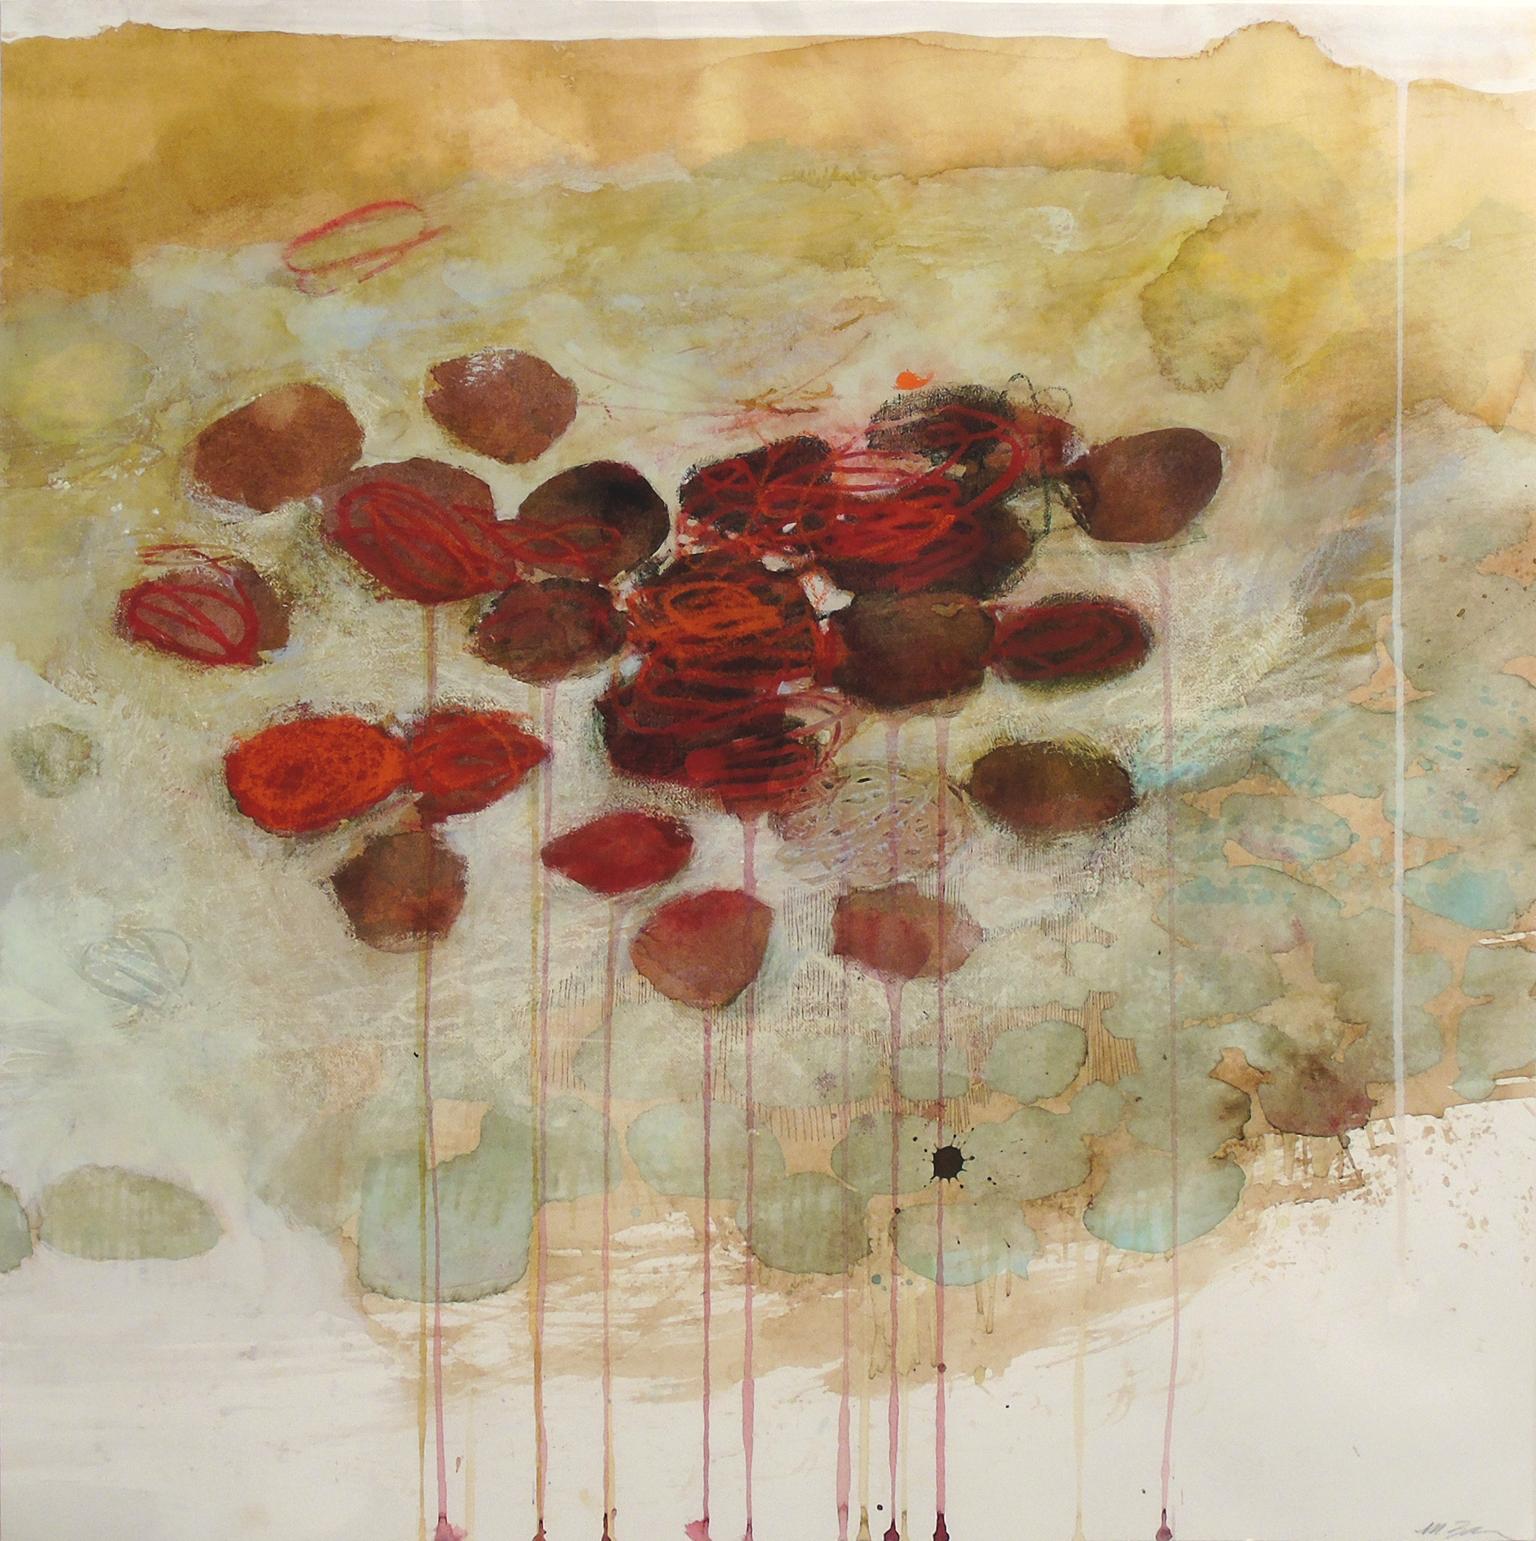 "Bonded by Florid Suspense", by Melissa Zarem, is an abstract work on paper in a gray wood frame. Red and brown ovals softly drip against a background of aqua and tan washes. Zarem used ink, watercolor, gouache and crayon to create this unique work